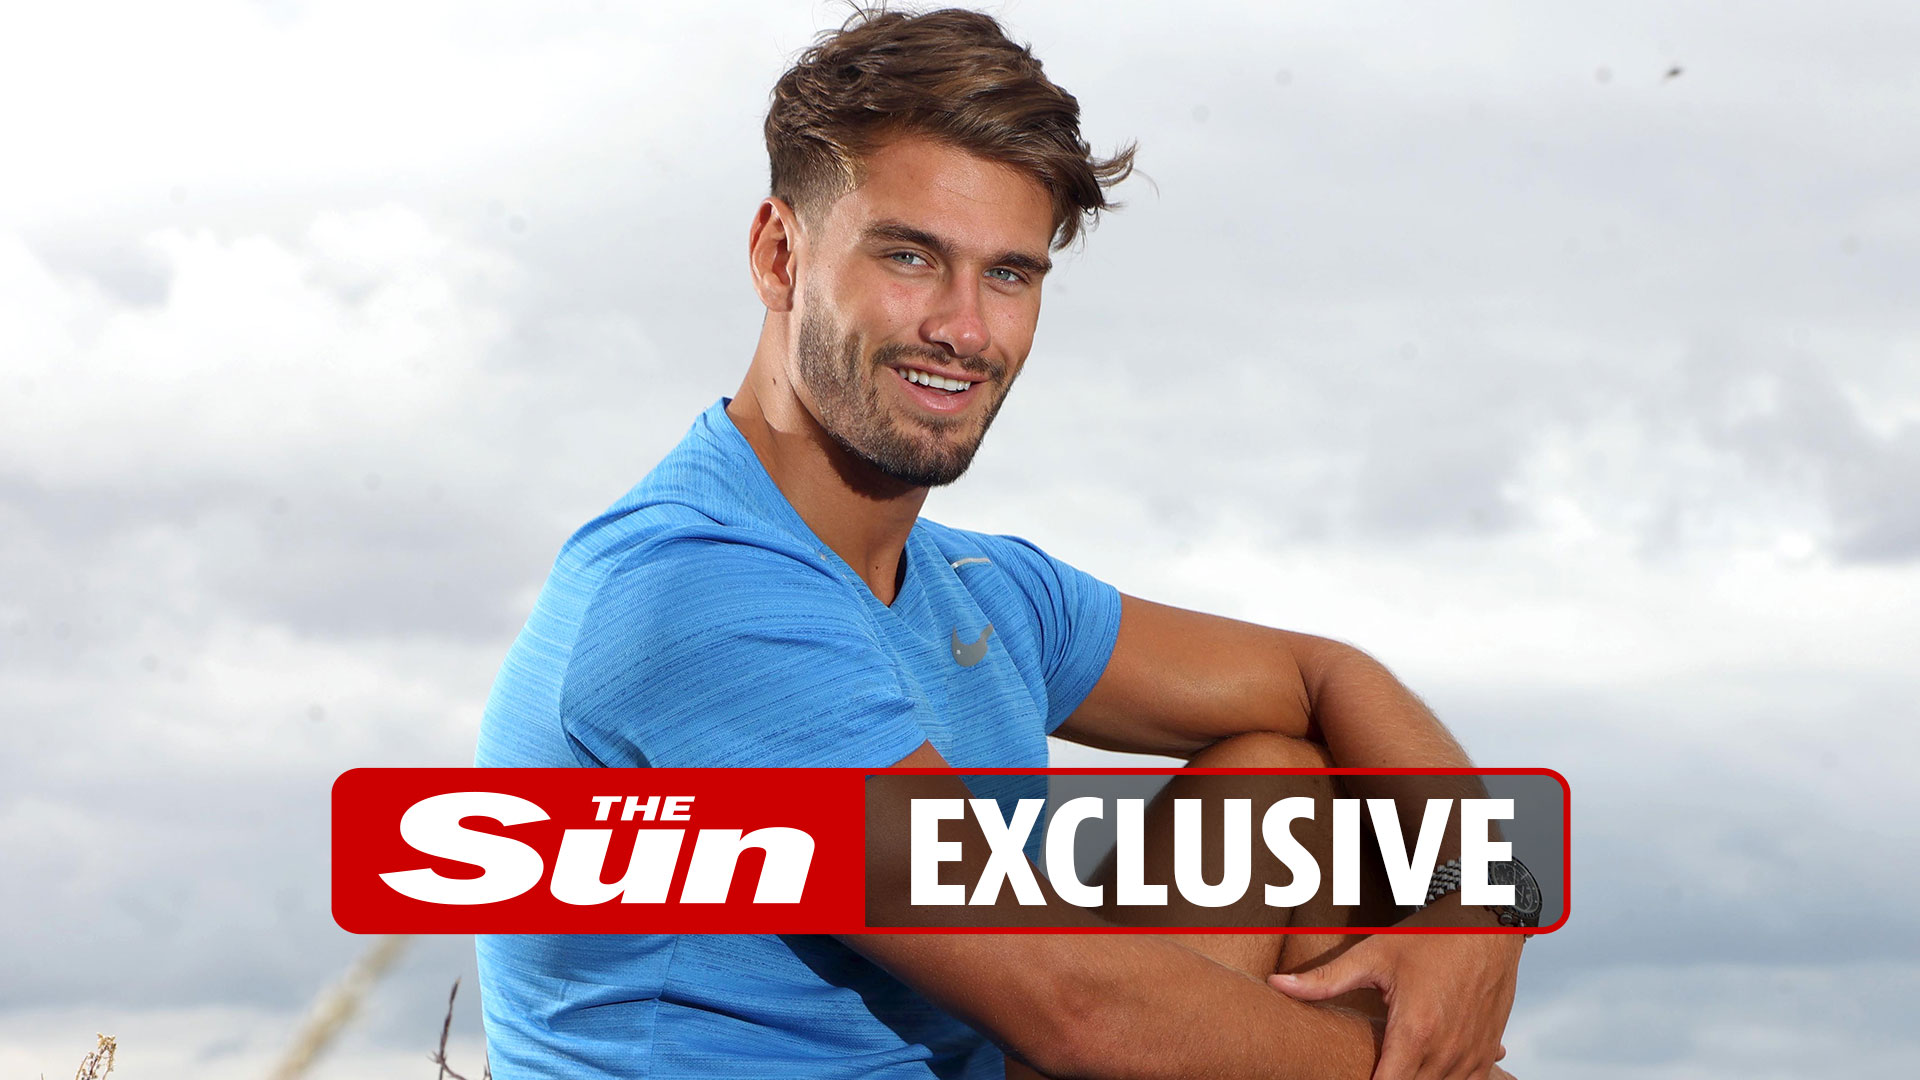 Jacques O’Neill, Love Island’s host, reveals that he knew an Islander in secret before the show aired – but it was not shown on TV